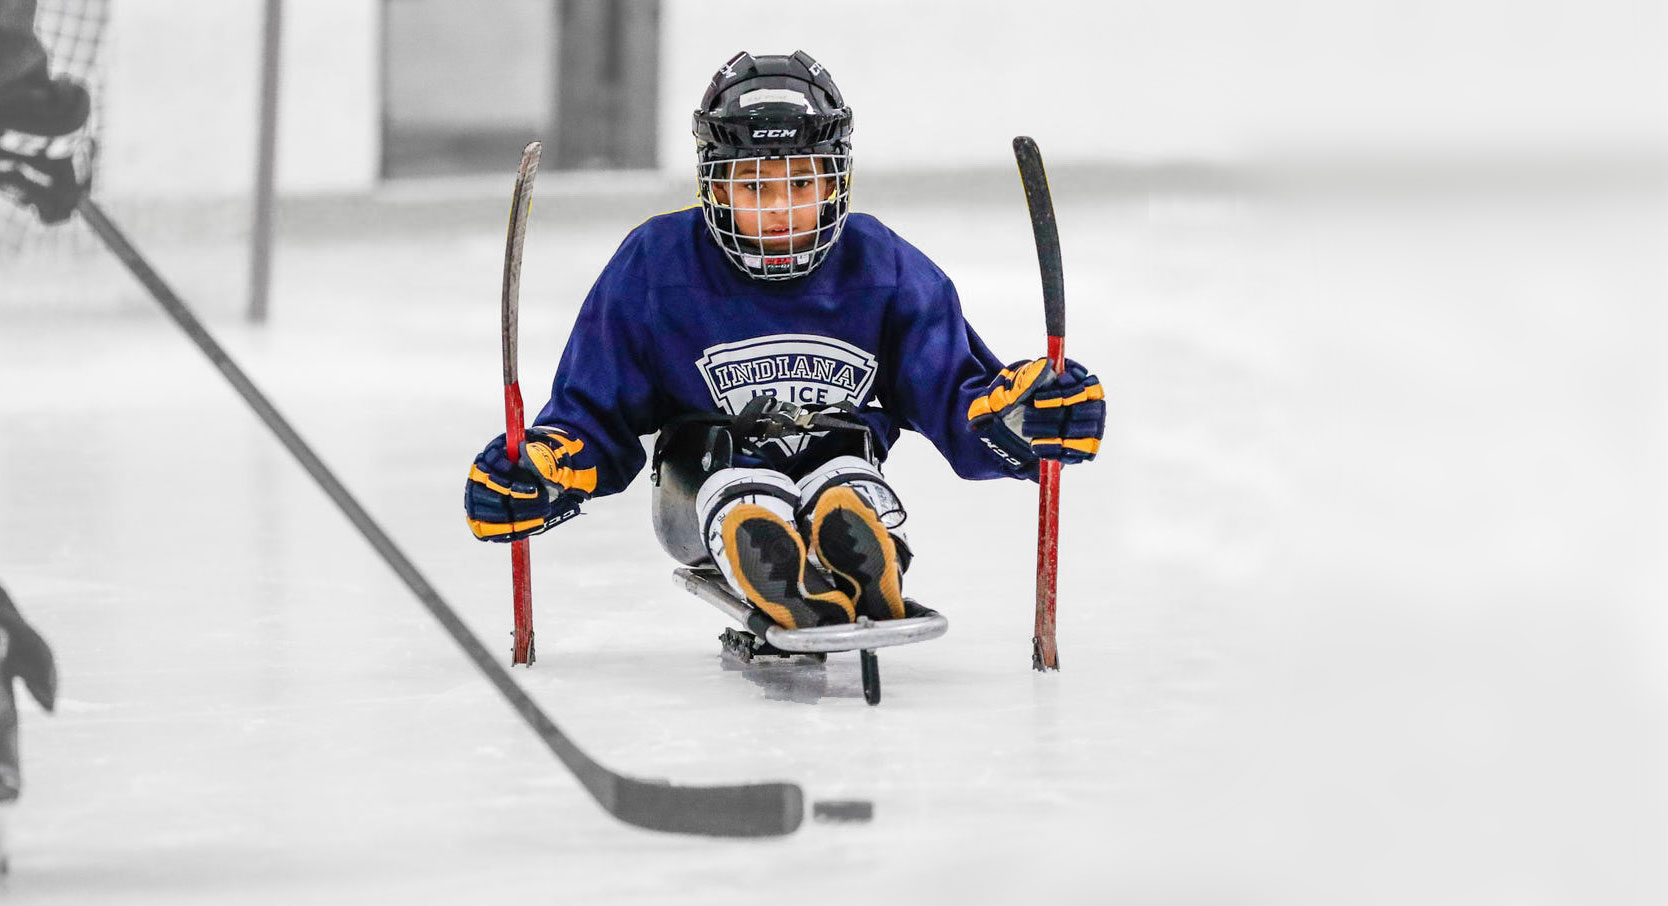 Young Indy Steel sled hockey player on the ice chasing a hockey puck